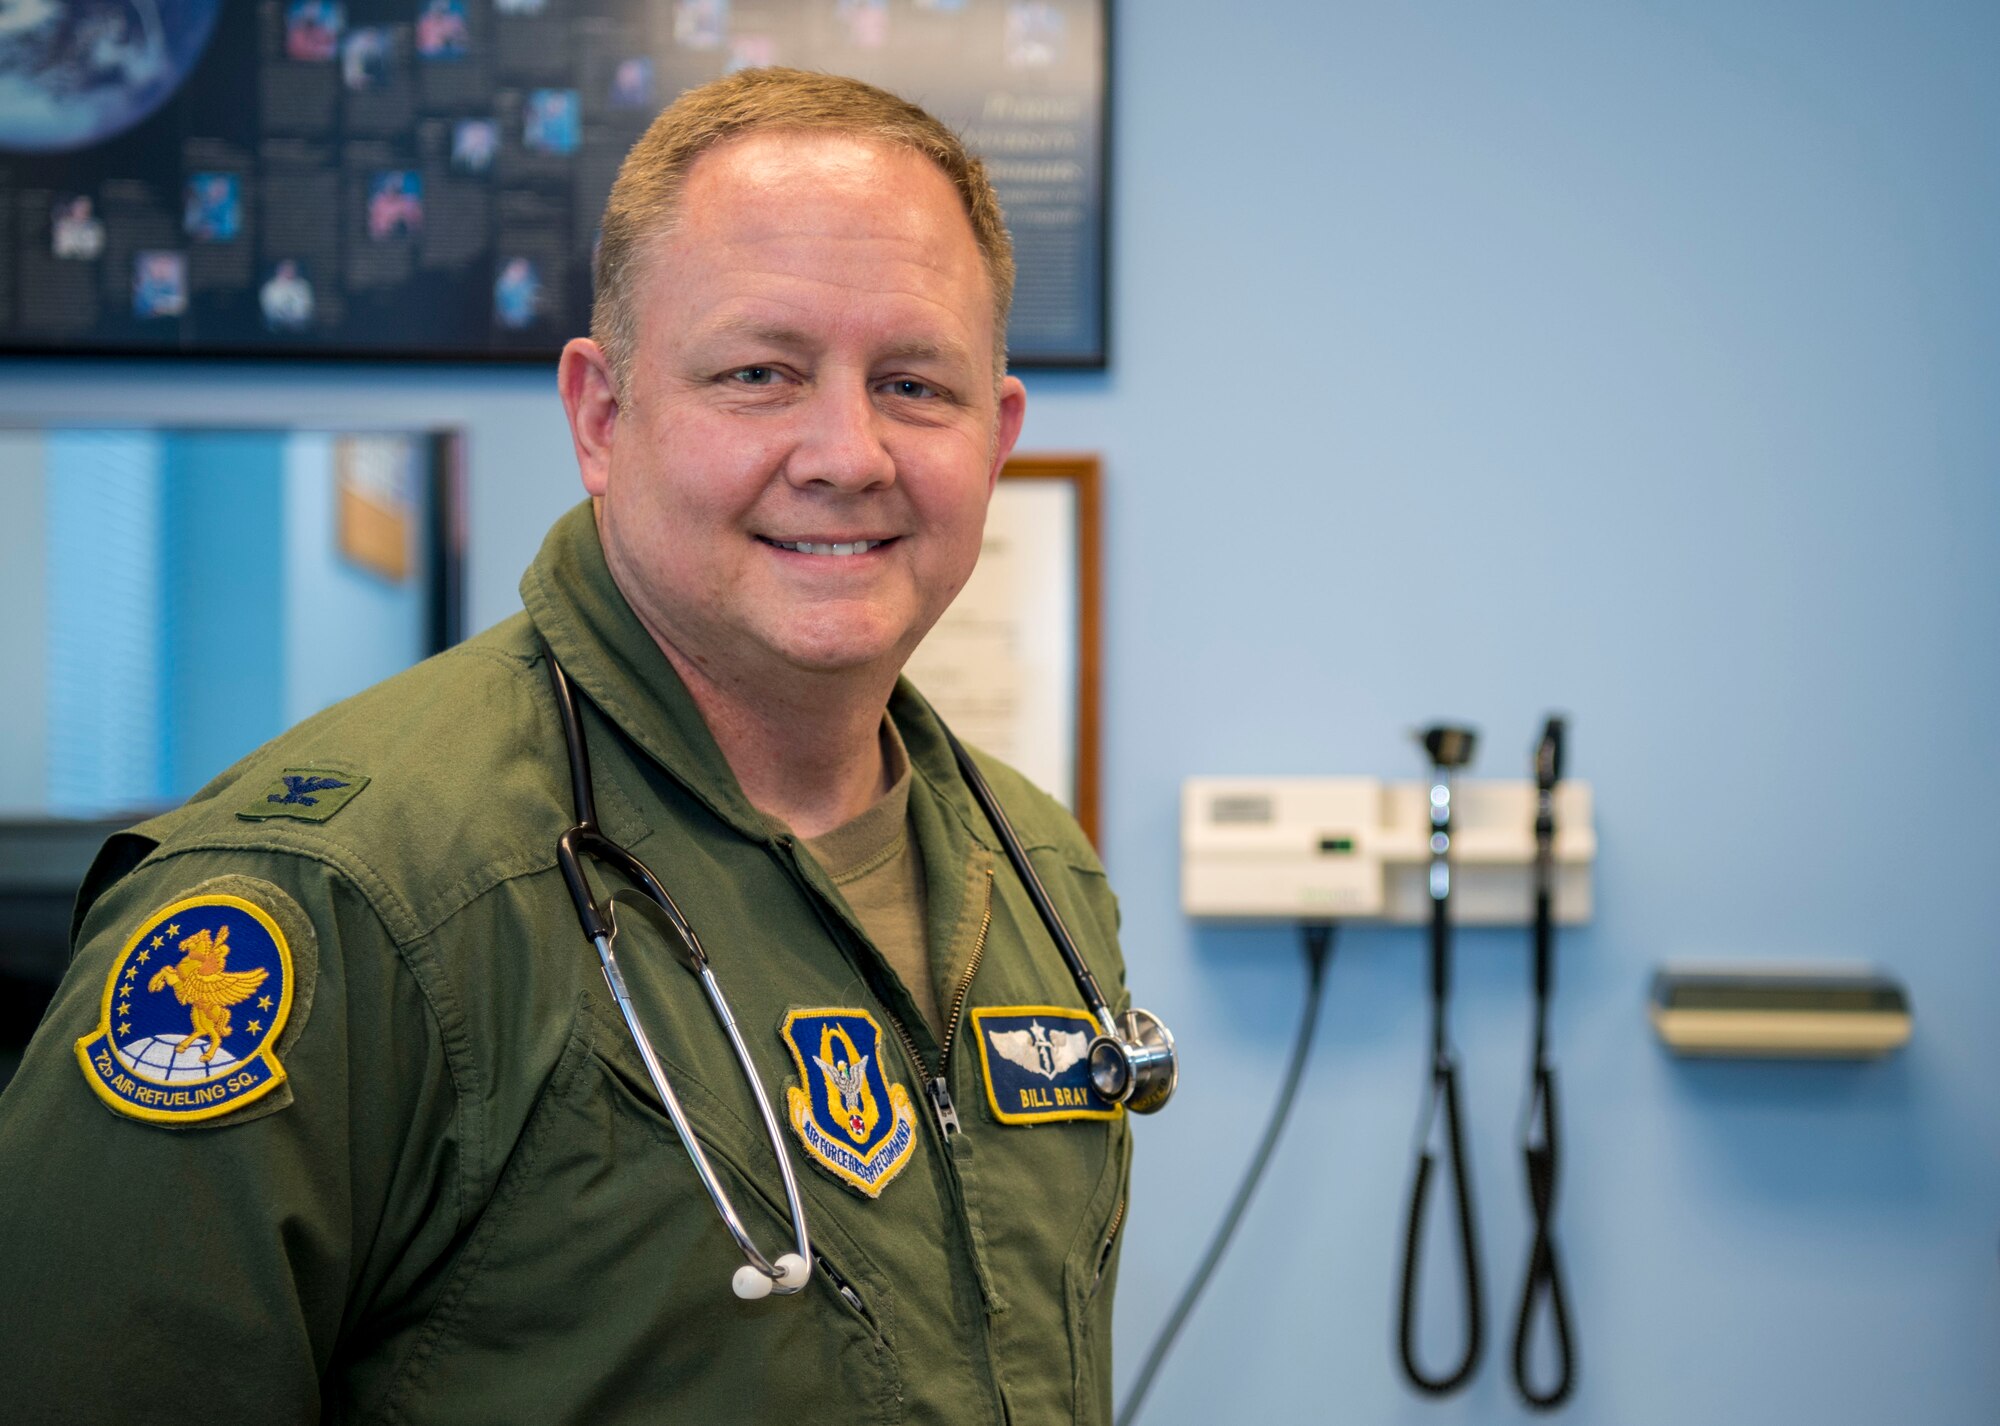 Col. (Dr.) William Bray, 434th Aerospace Medicine Squadron flight surgeon, poses for a photo in his office, May 1, 2021, at Grissom Air Reserve Base, Indiana. Last year, Bray joined the Grissom team as the base’s first full-time doctor. (U.S. Air Force photo by Staff Sgt. Alexa Culbert)